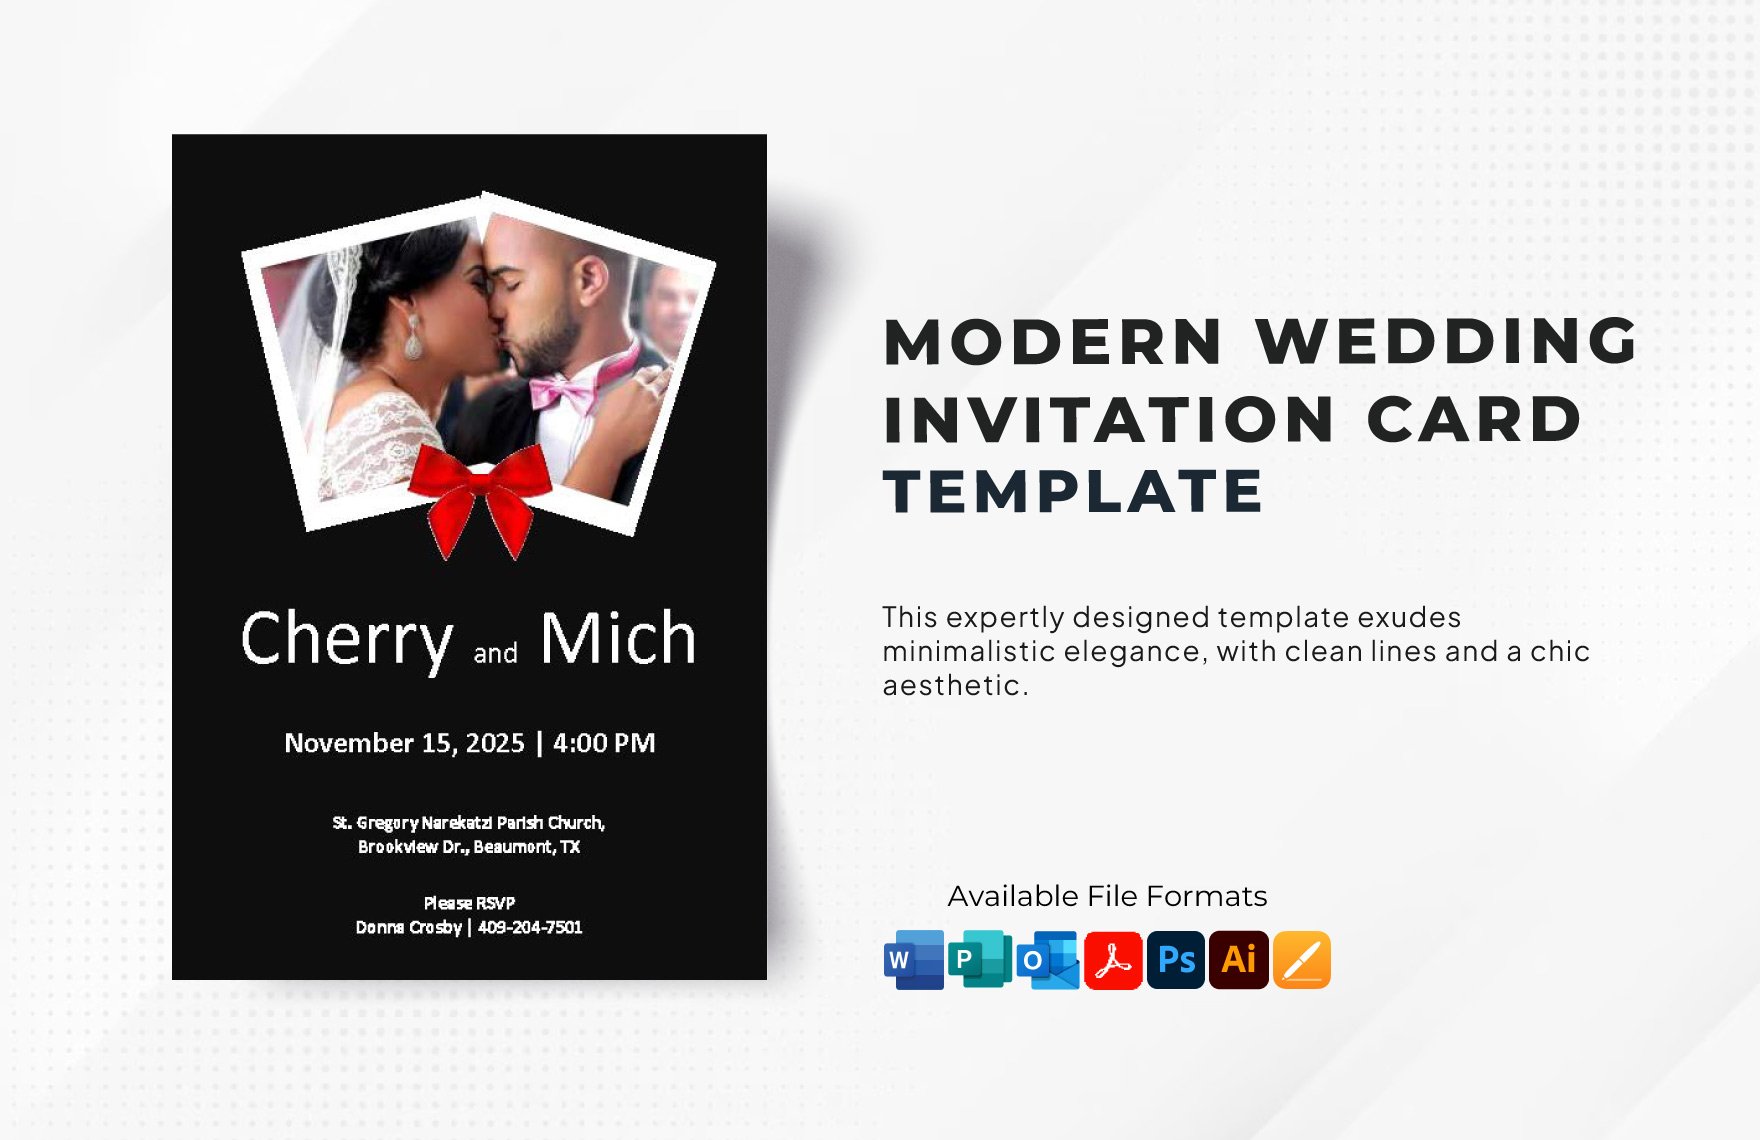 Modern Wedding Invitation Card Template in Word, PDF, Illustrator, PSD, Apple Pages, Publisher, InDesign, Outlook